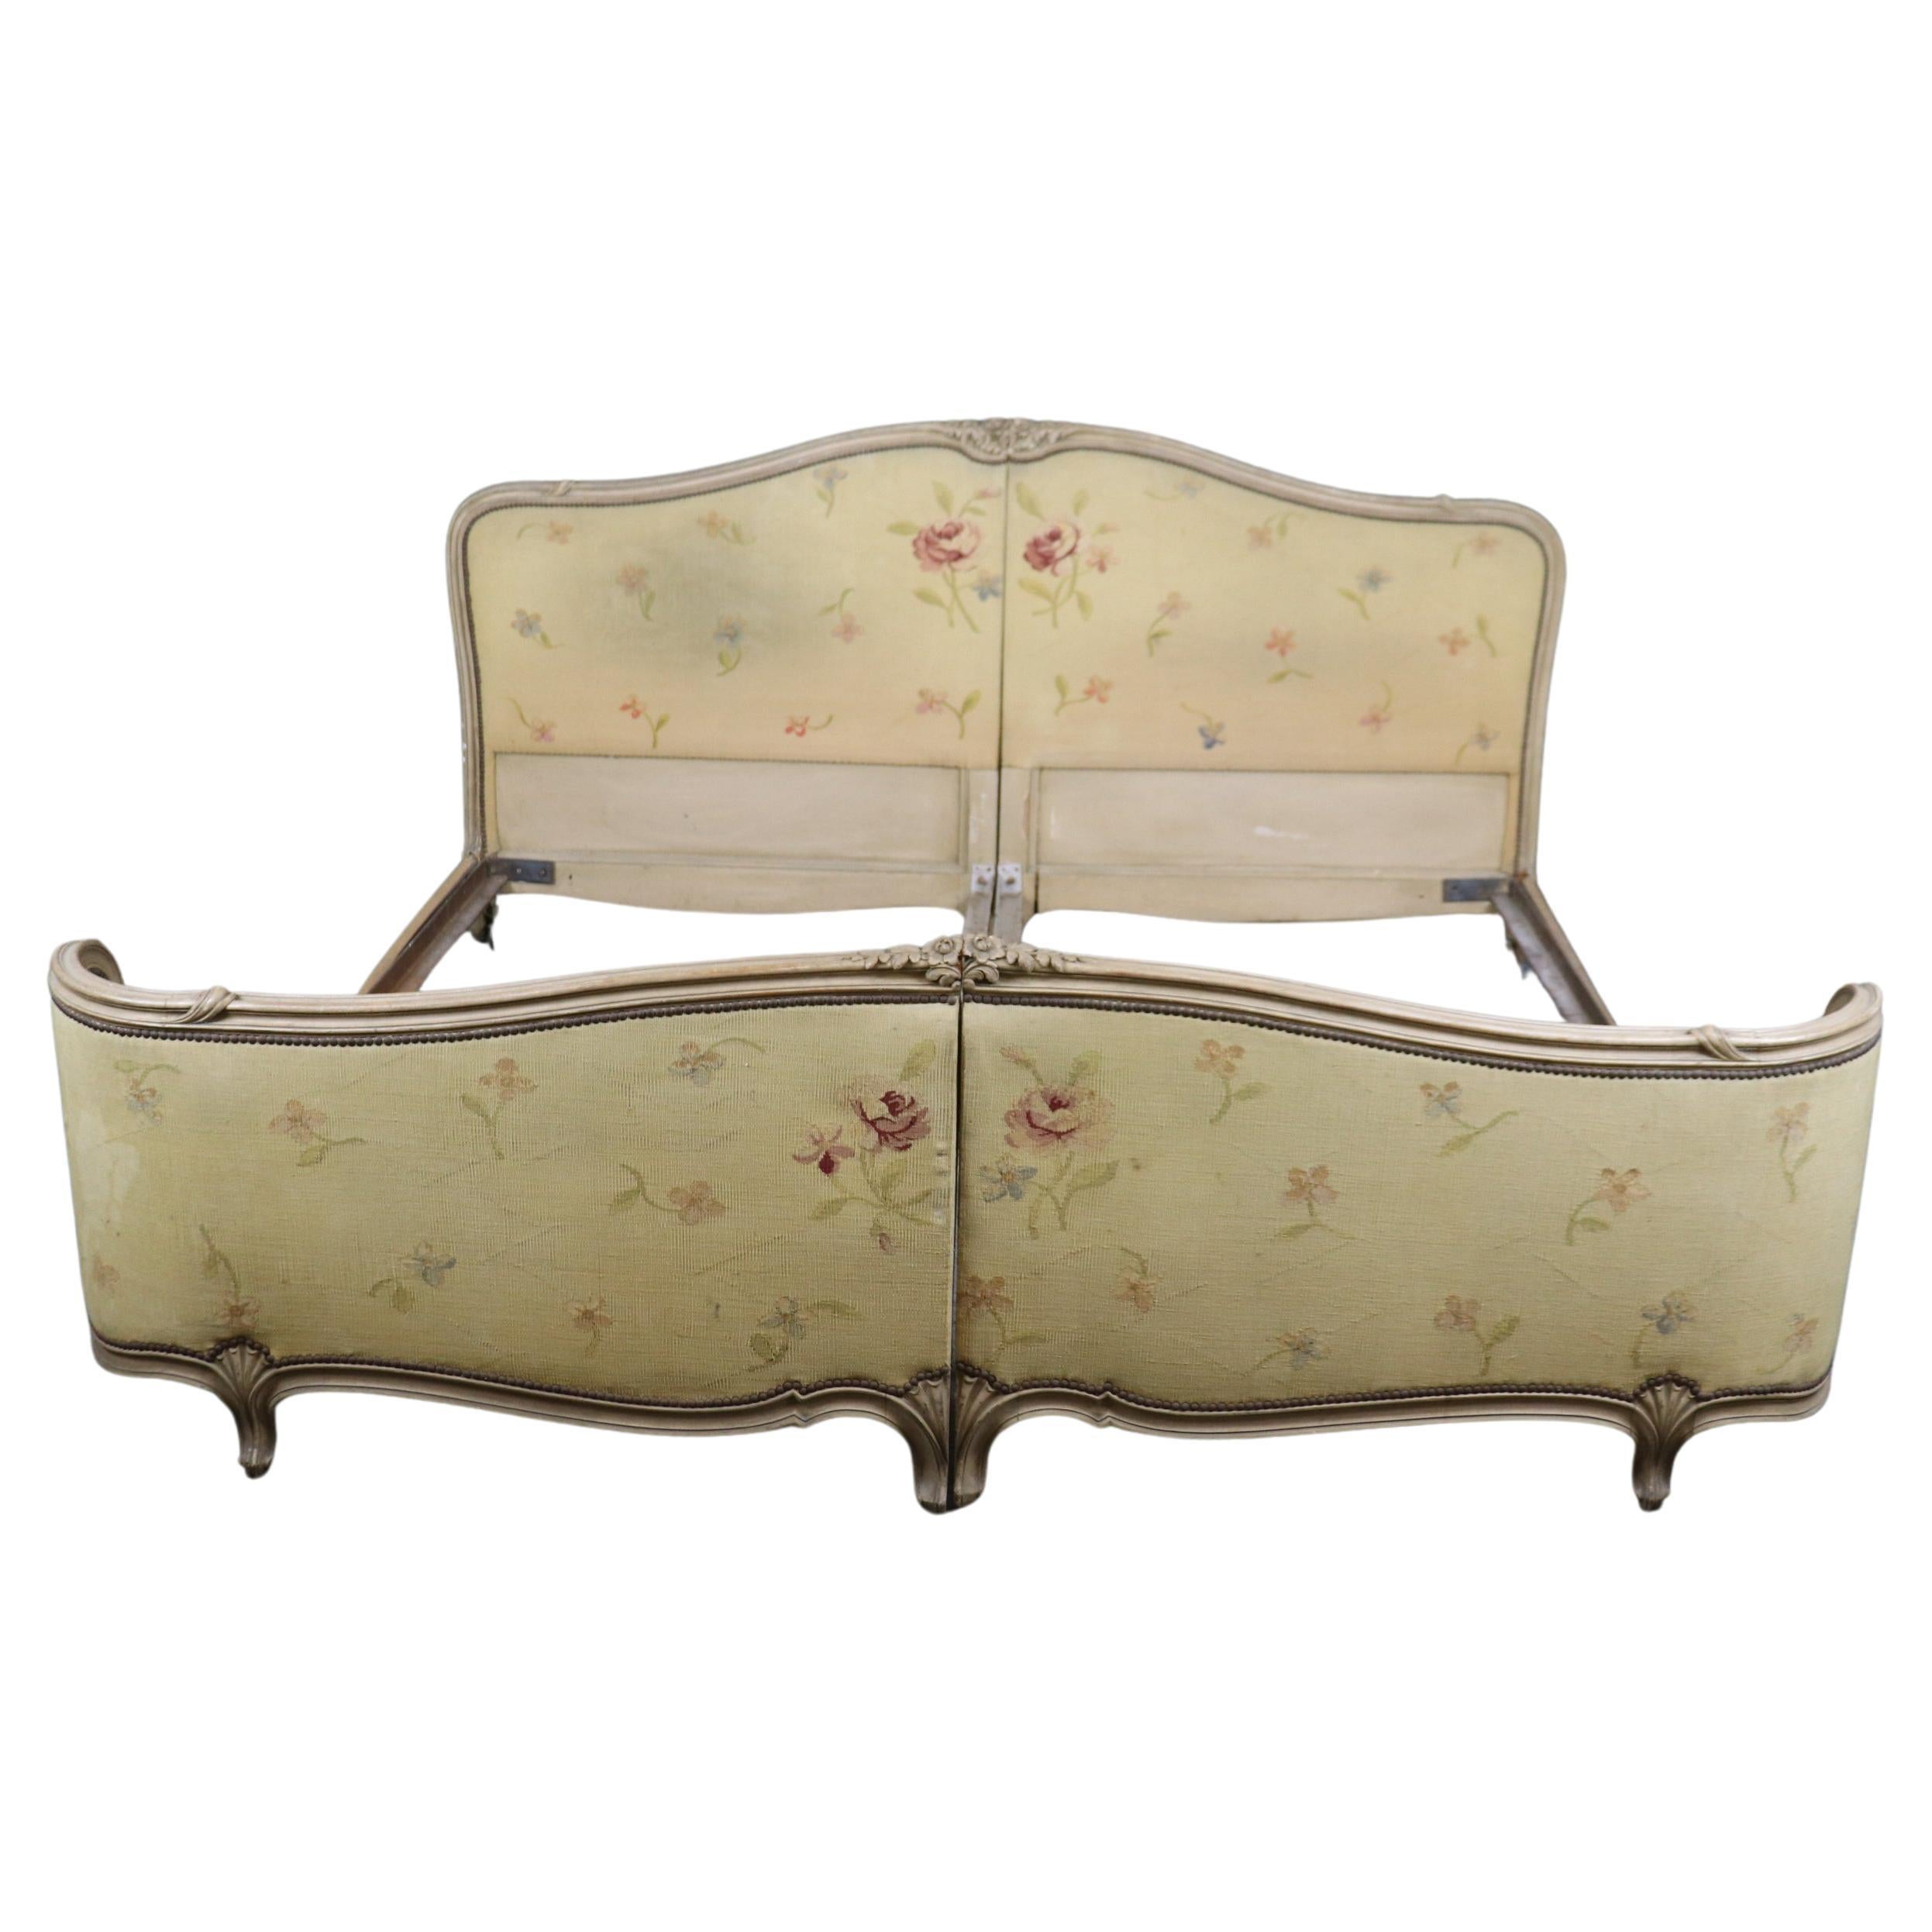 Larger-than-King Size French Folding Antique Carved Louis XV Bed Circa 1920